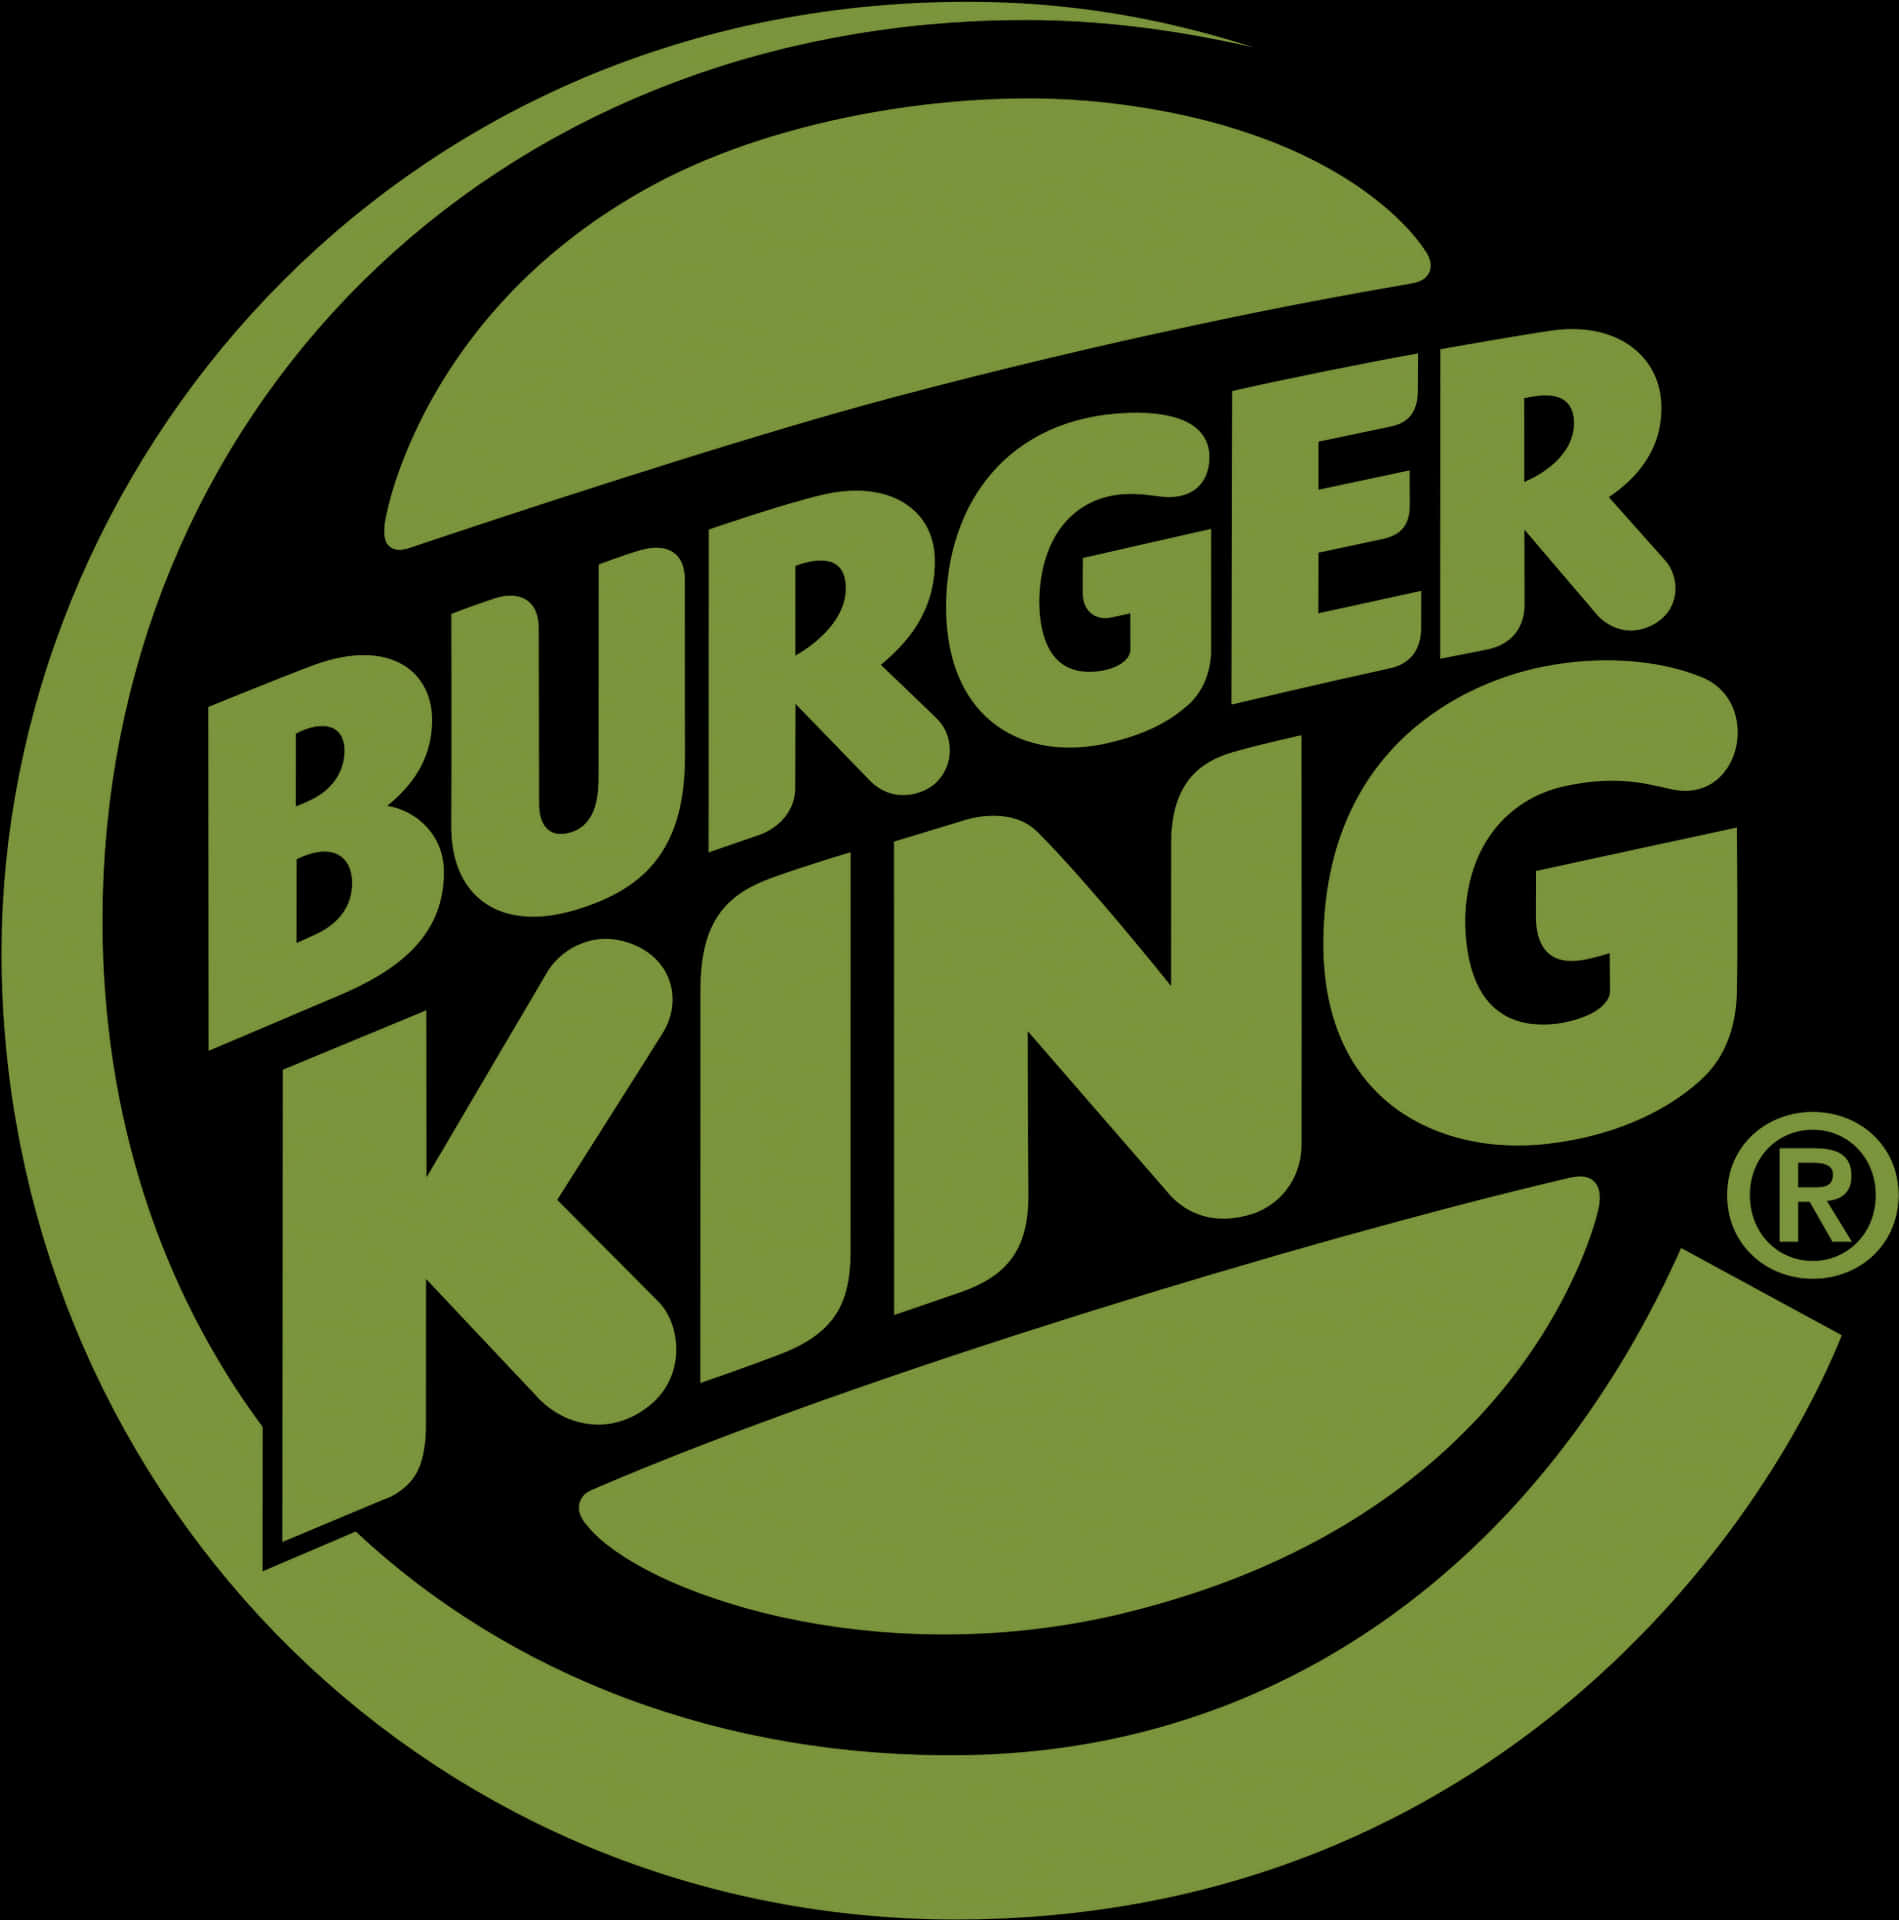 Satisfy your cravings with Burger King's delicious range of food